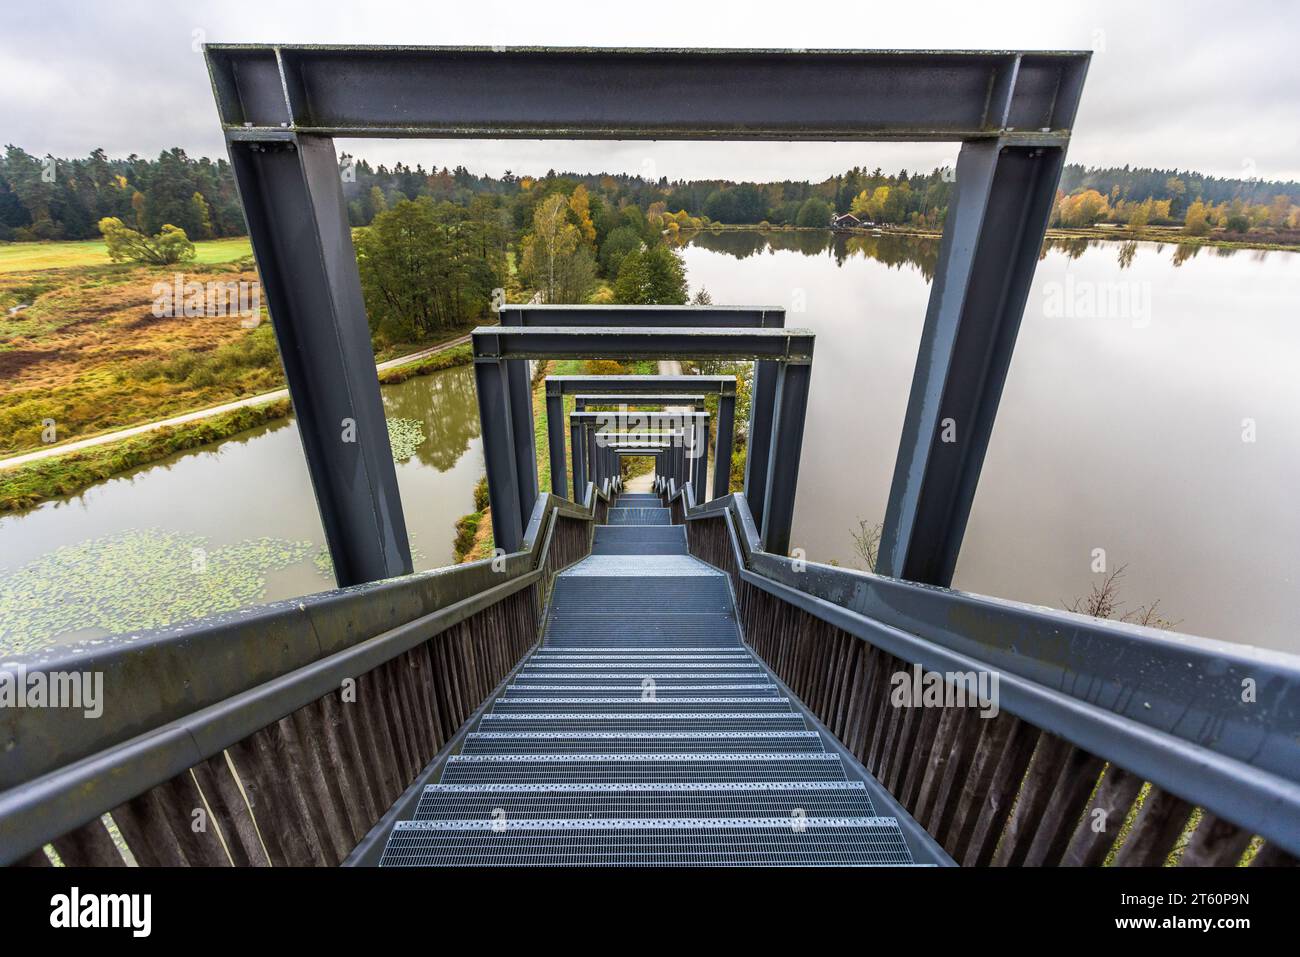 Sky ladder viewing platform in the Waldnaabaue. The steel construction by architects Brückner & Brückner looks like a picture frame for the landscape. Tirschenreuth, Germany Stock Photo